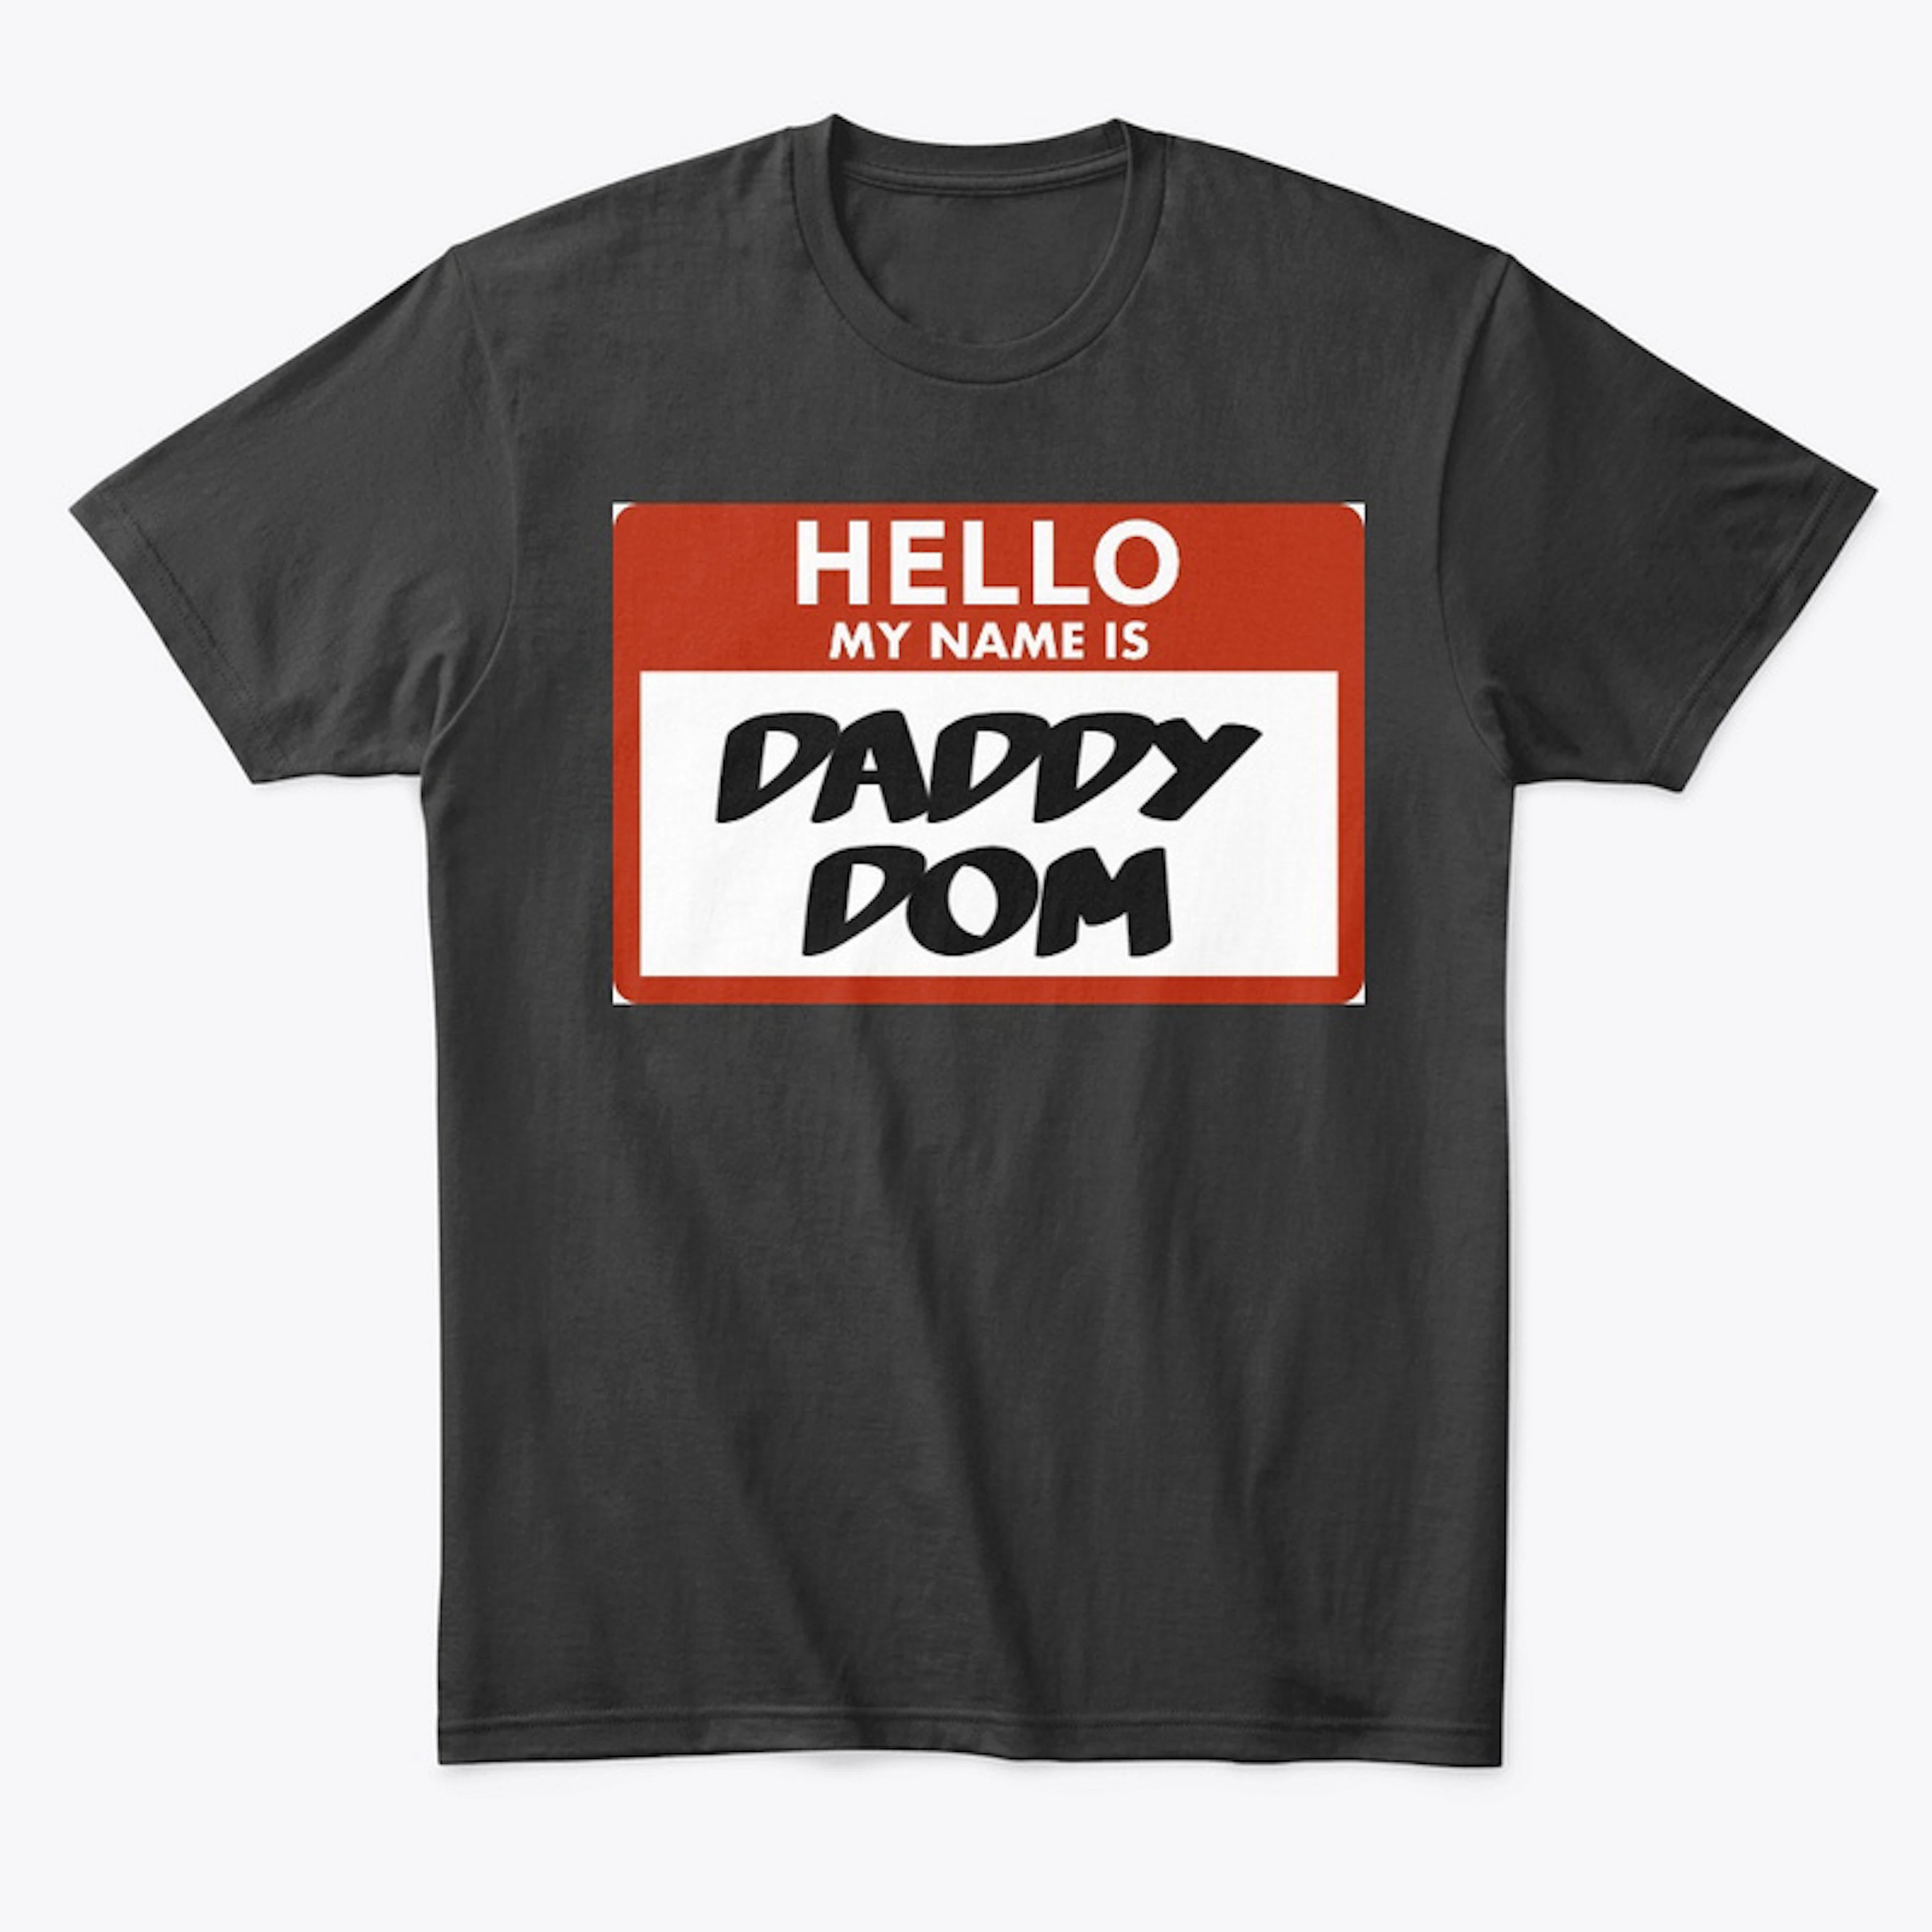 FOR DADDY DOM